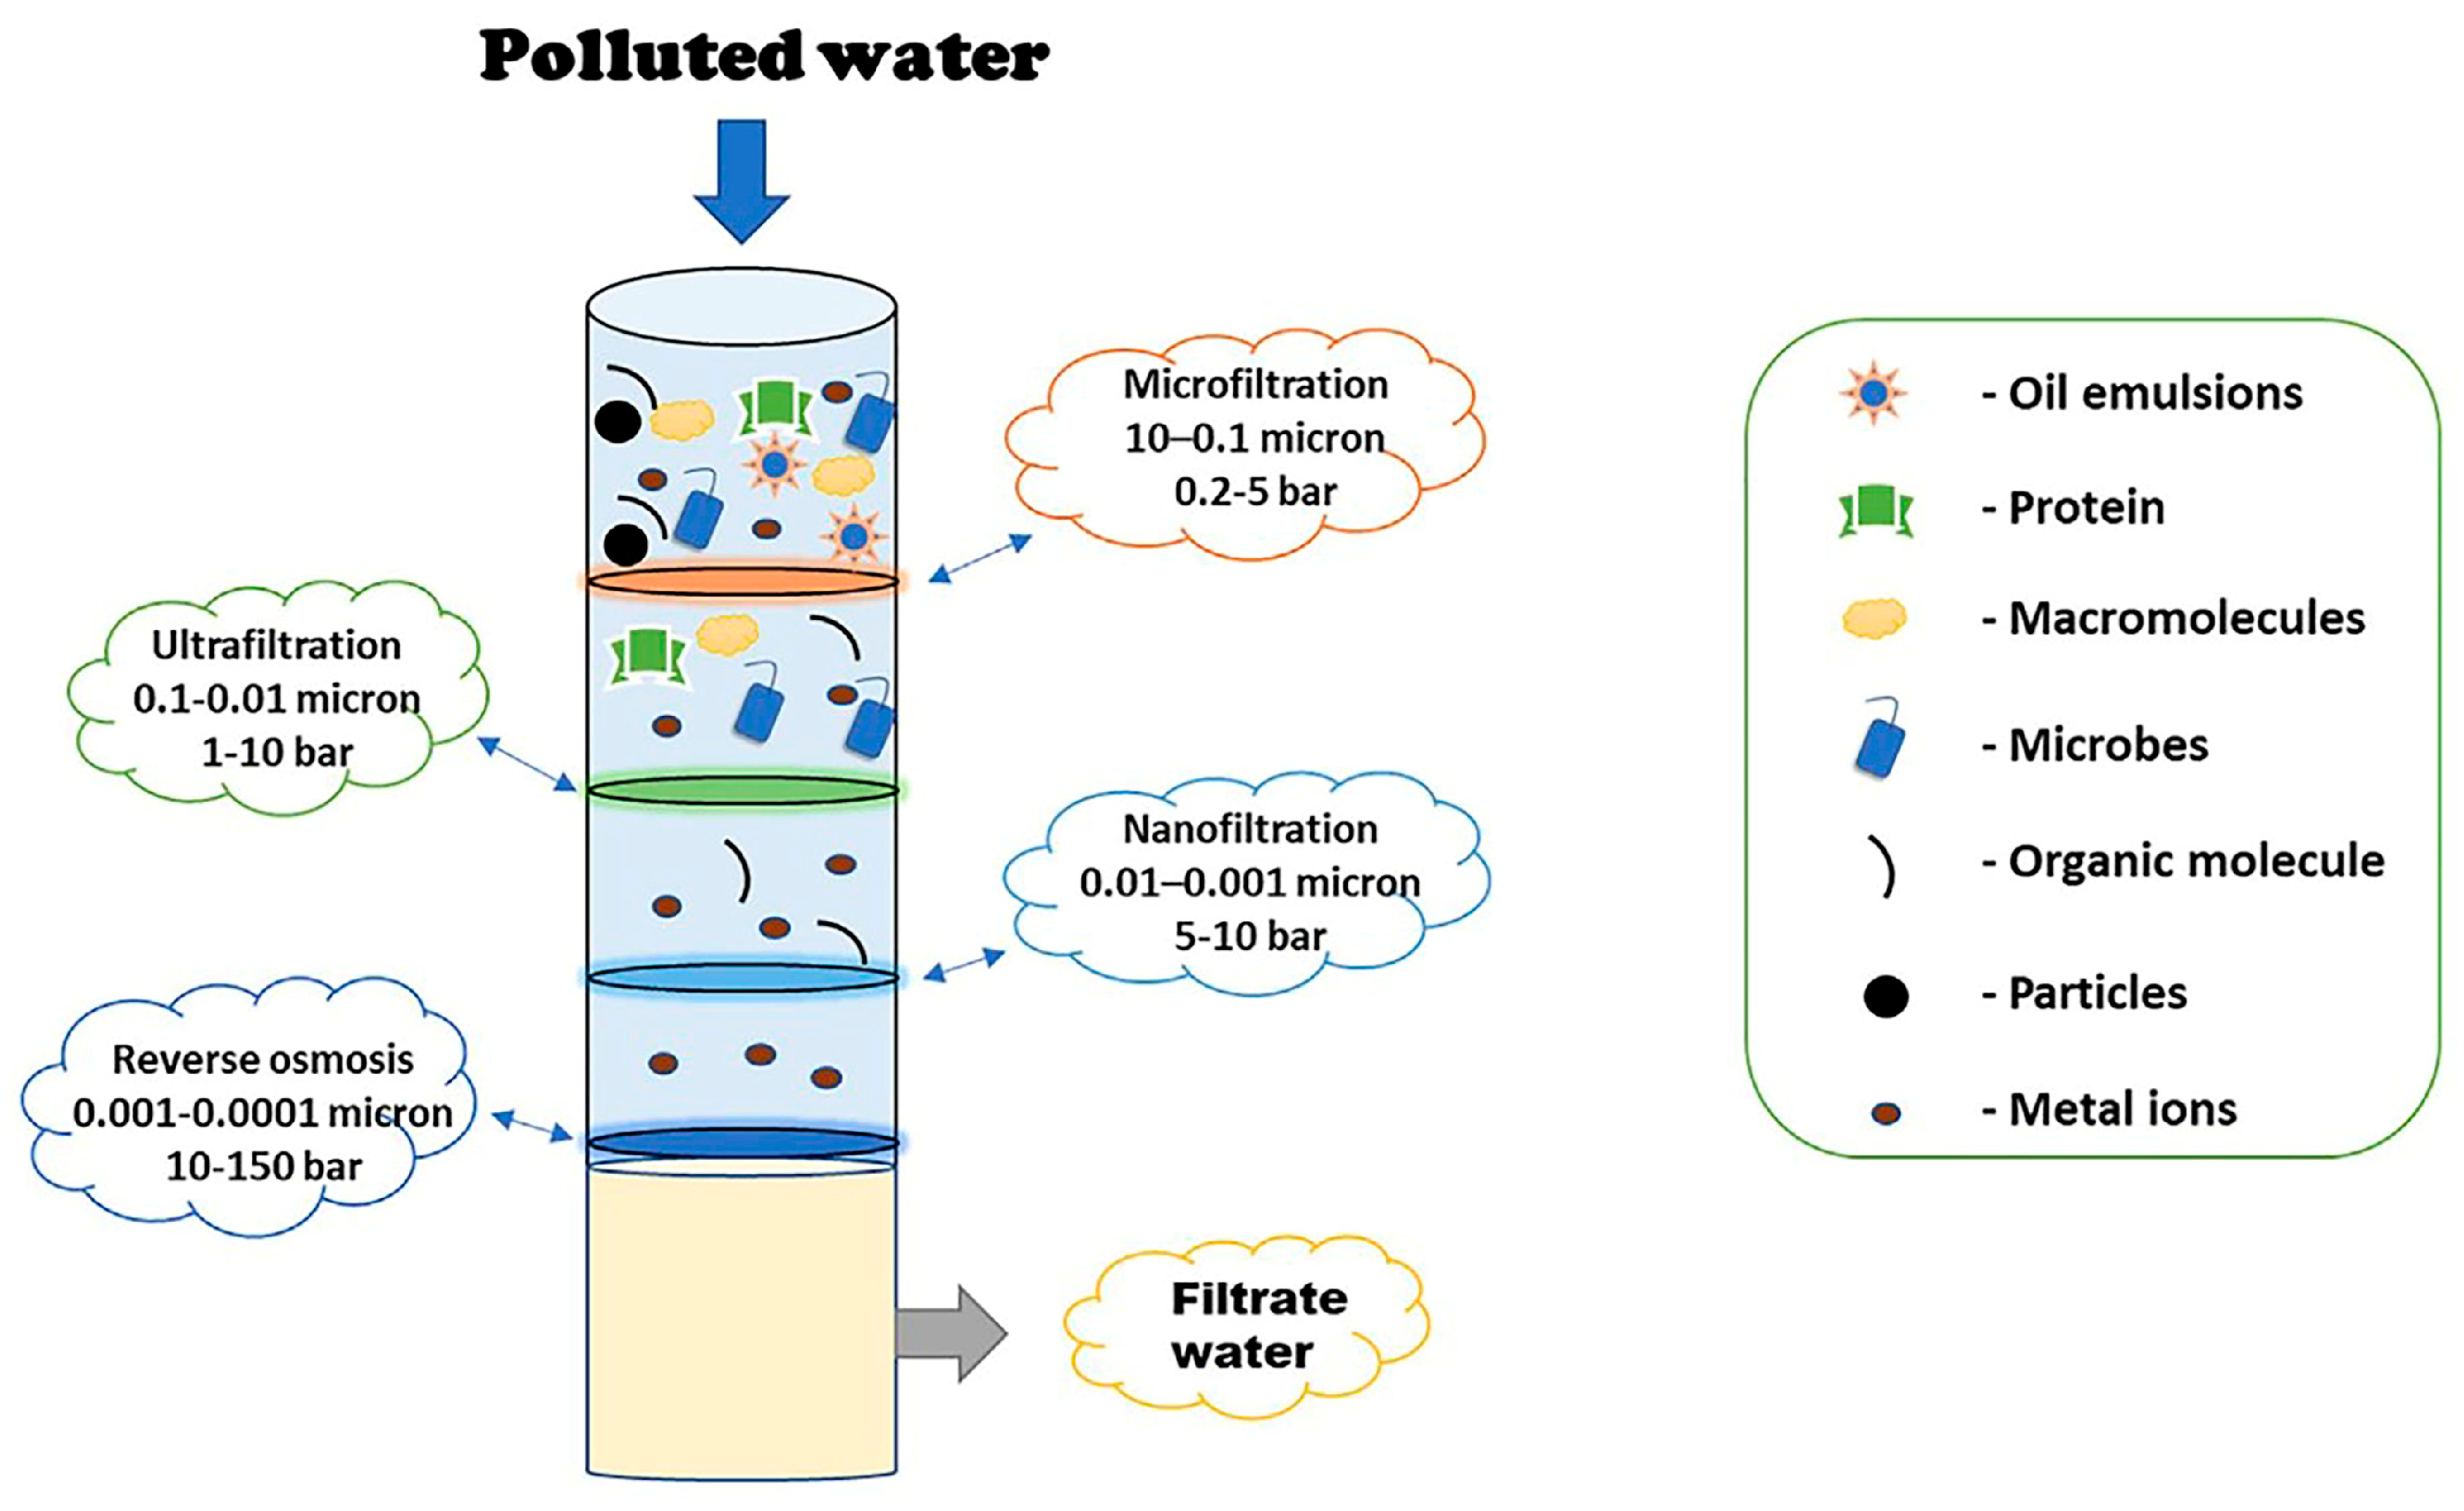 Nanofiltration” Enabled by Super-Absorbent Polymer Beads for Concentrating  Microorganisms in Water Samples